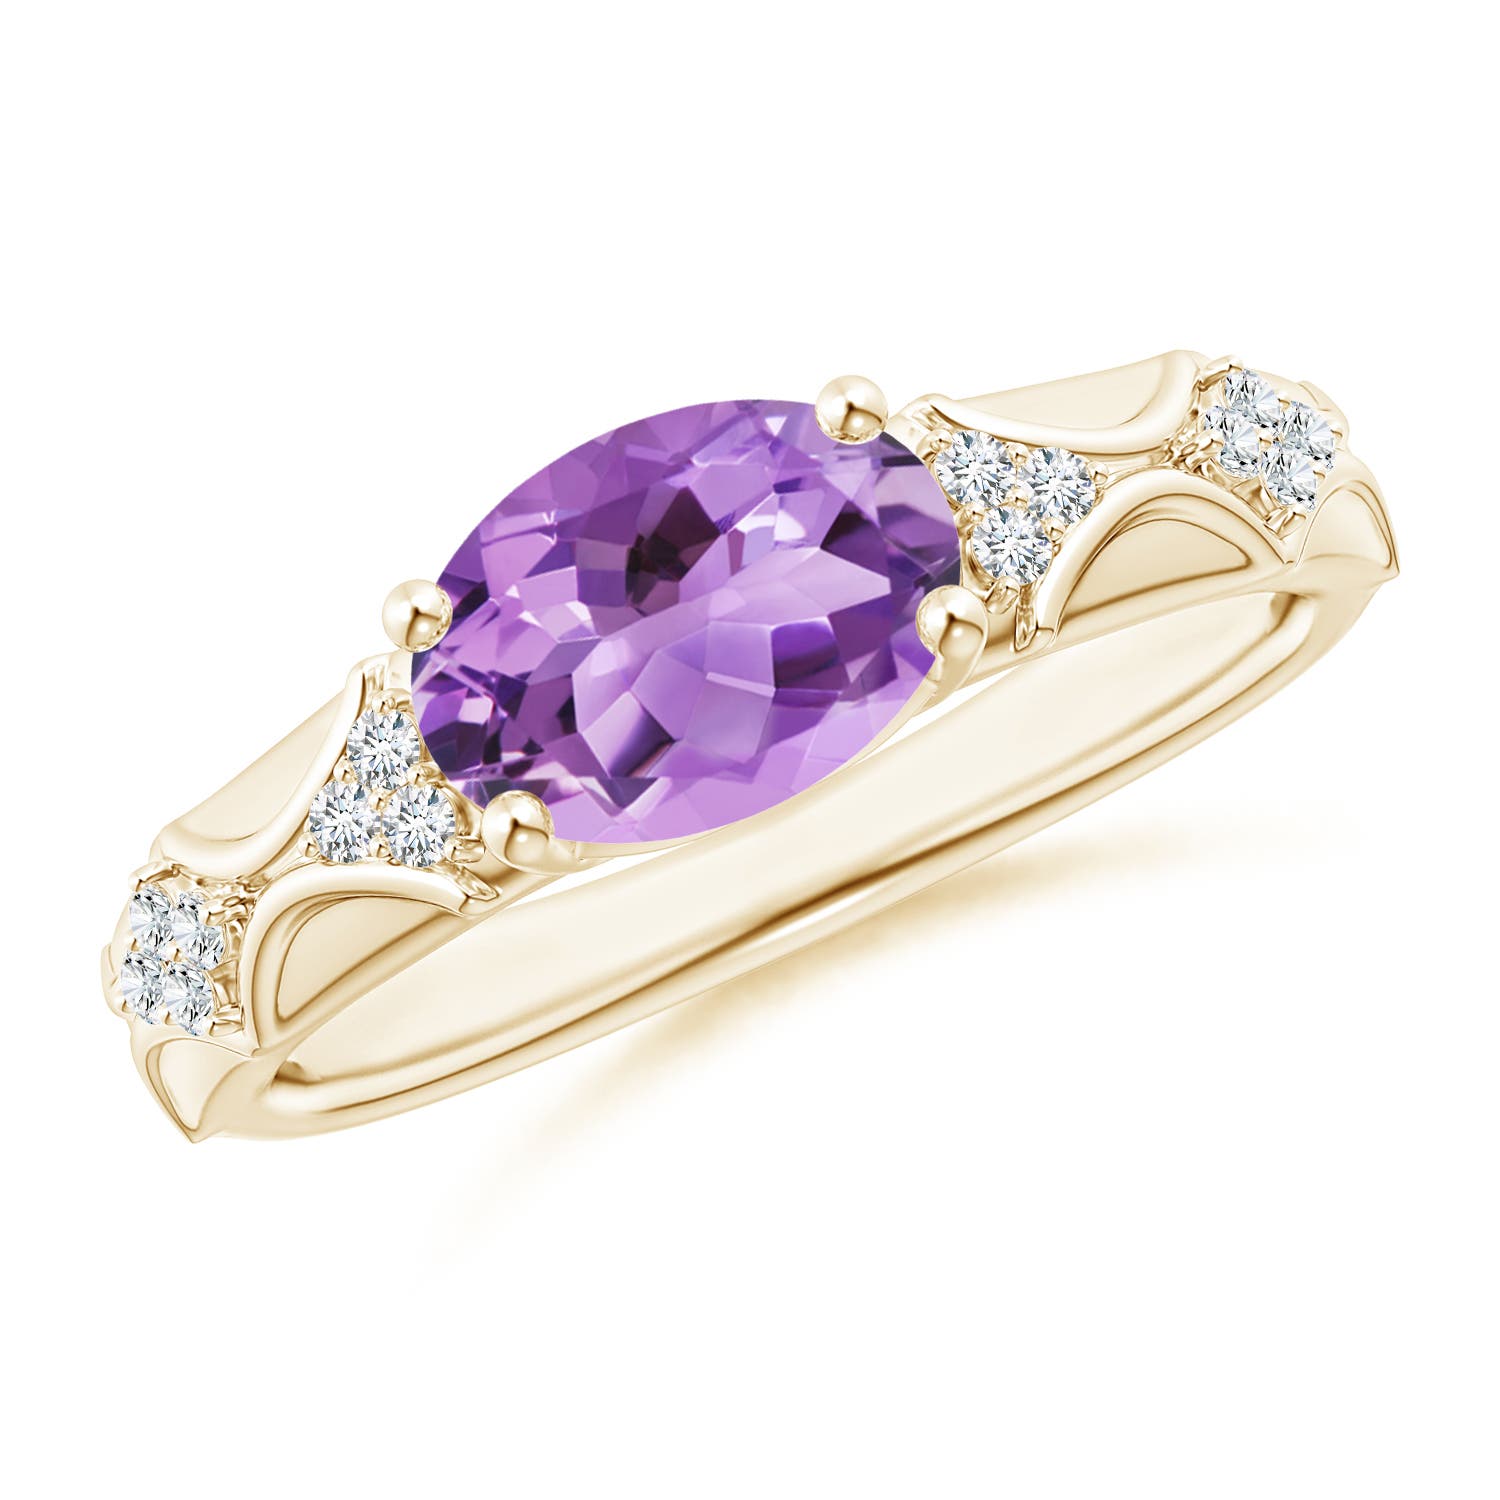 A - Amethyst / 1.68 CT / 14 KT Yellow Gold